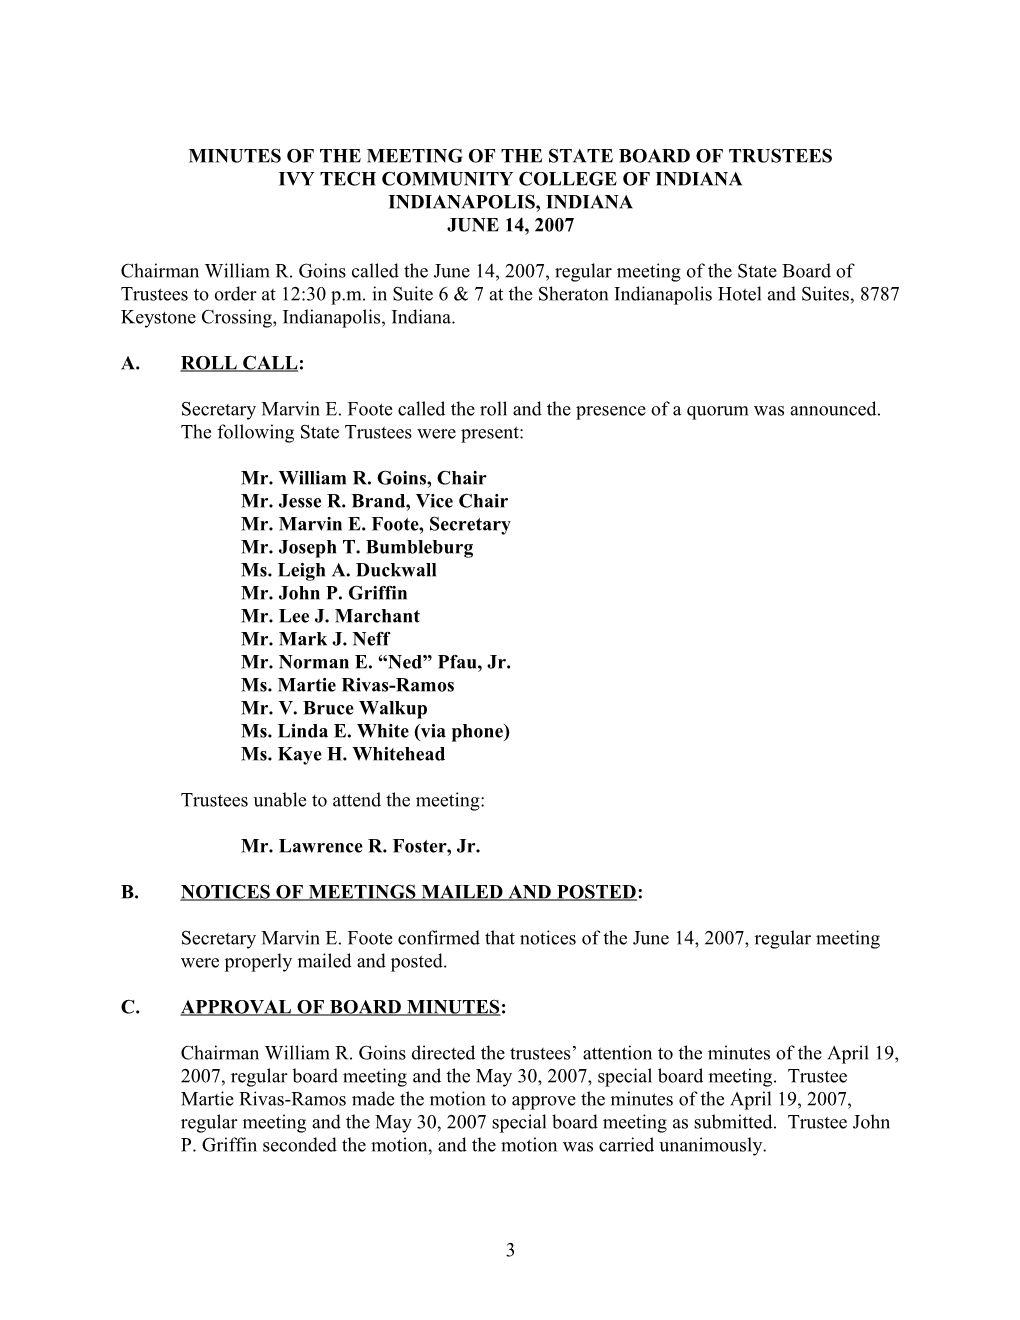 Minutes of the Meeting of the State Board of Trustees